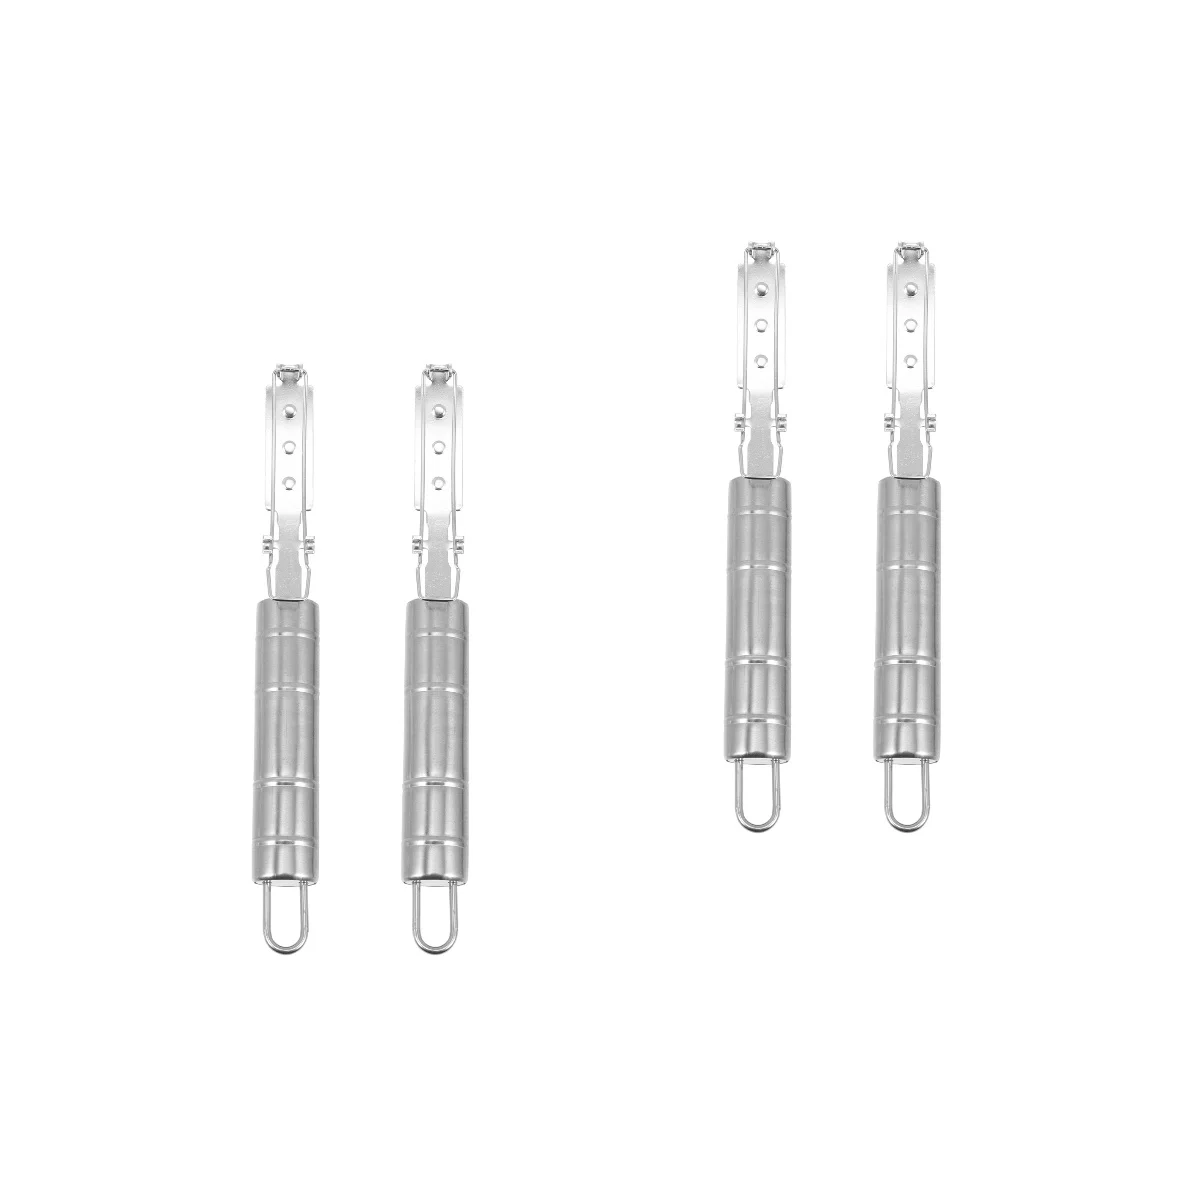 

4 Pcs Hair Removing Stainless Steel Hair Scraper Hair Razor without